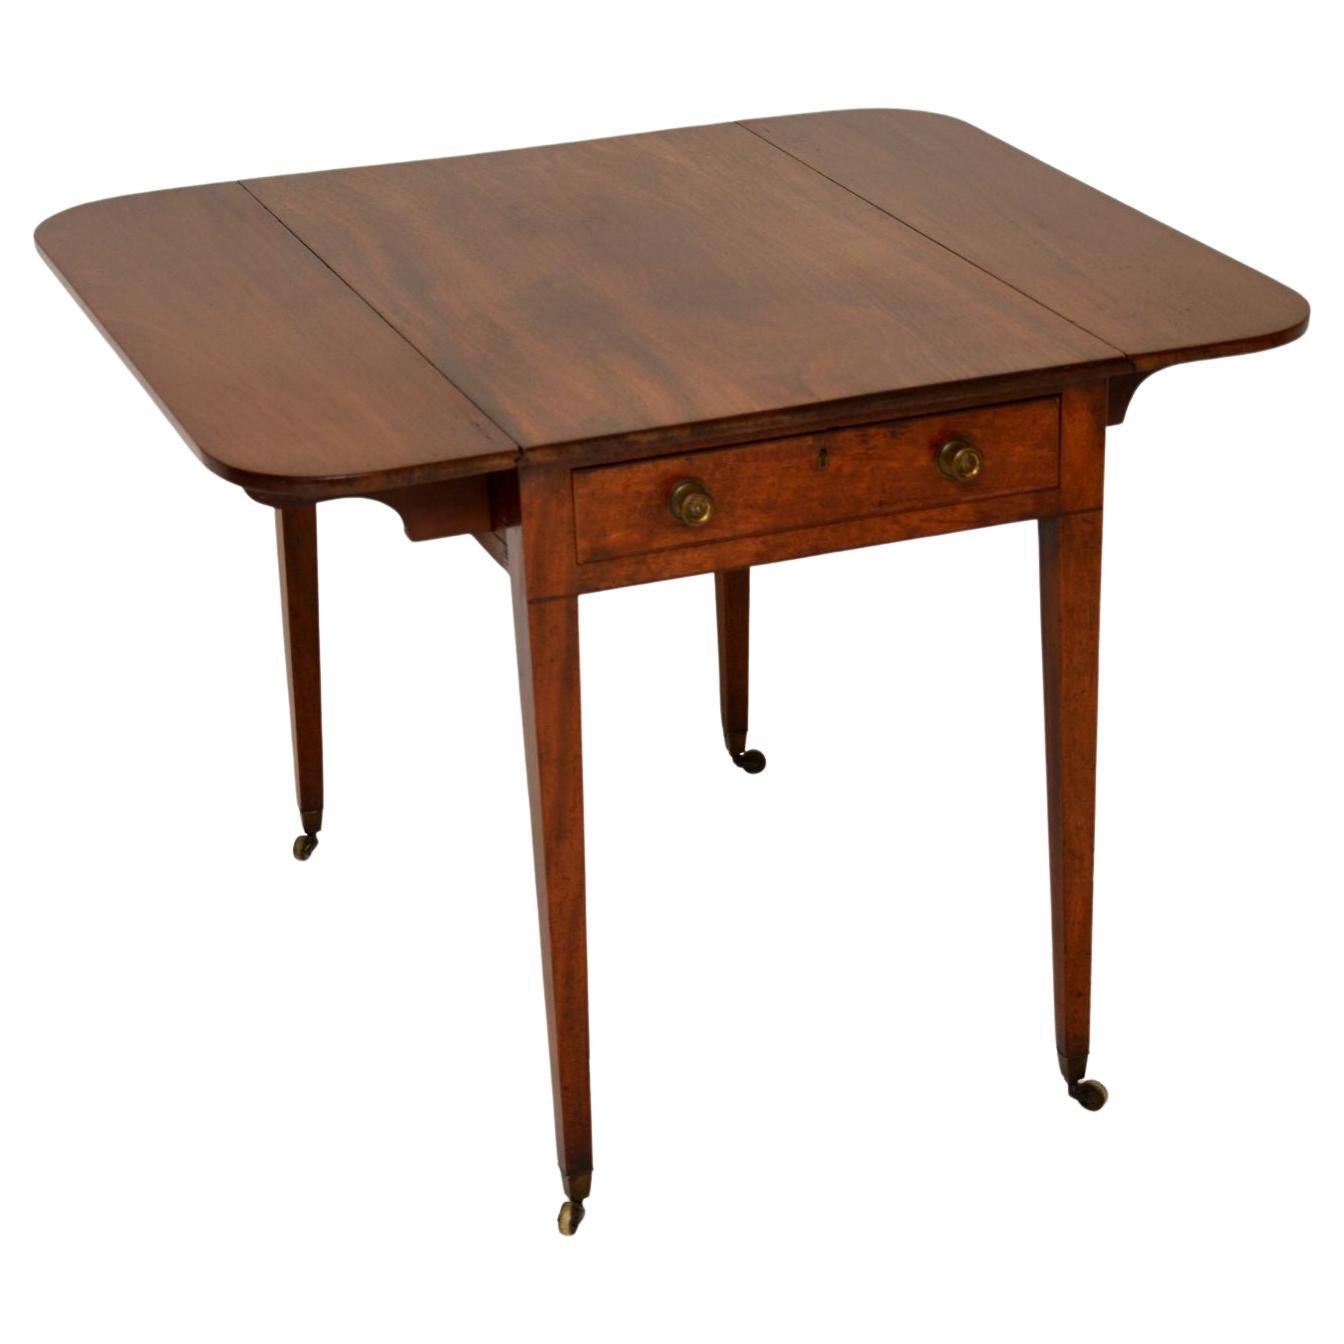 An elegant and very well made Georgian period Pembroke table. This was made in England, it dates from around 1790-1810 period.

The quality is superb, and has acquired a gorgeous patina over the years. There are original brass handles and casters,